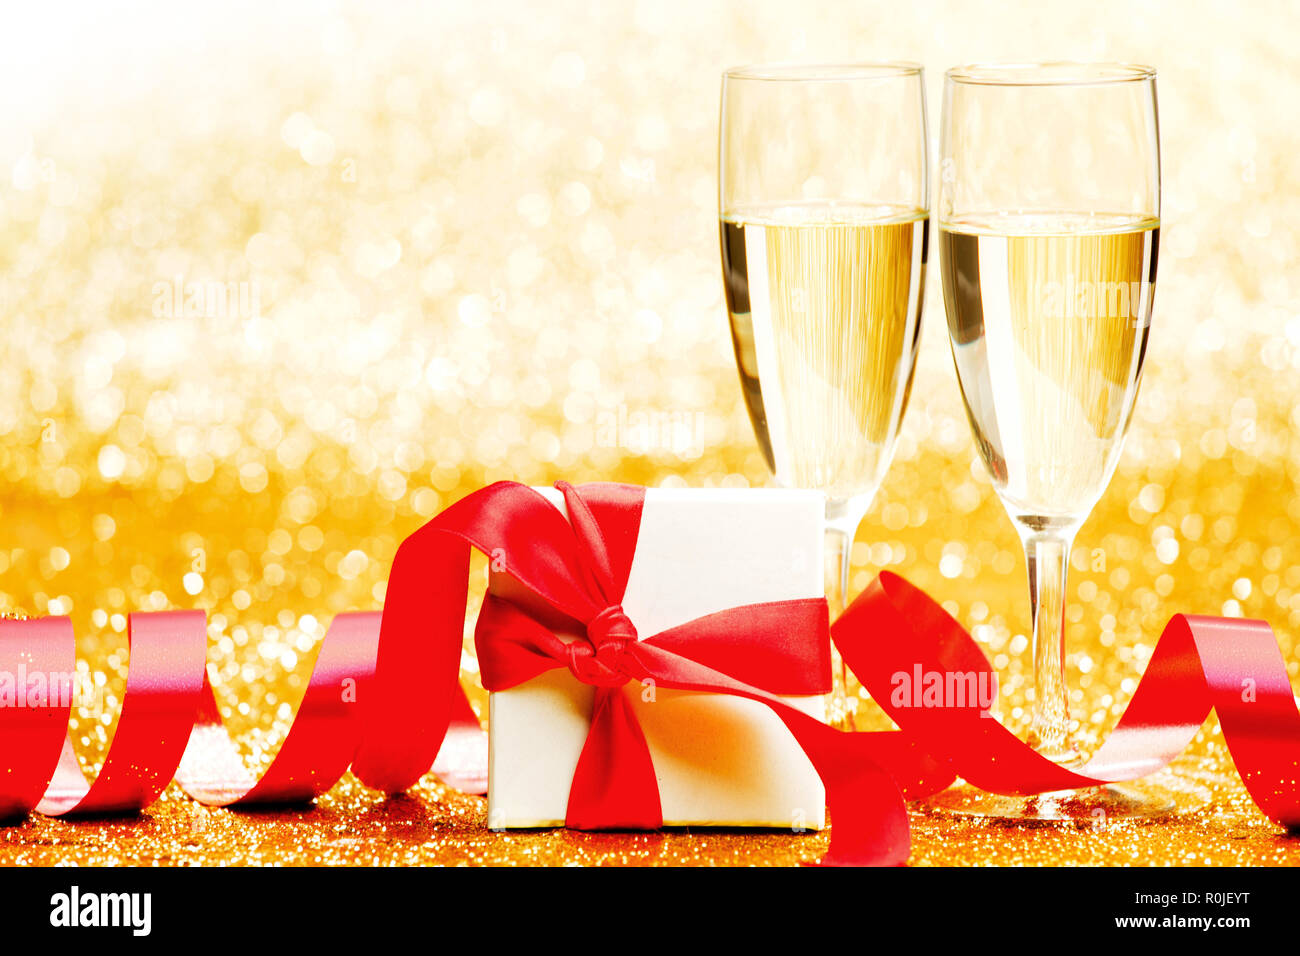 Champagne glasses and present in whitebox with red ribbon on golden background Stock Photo